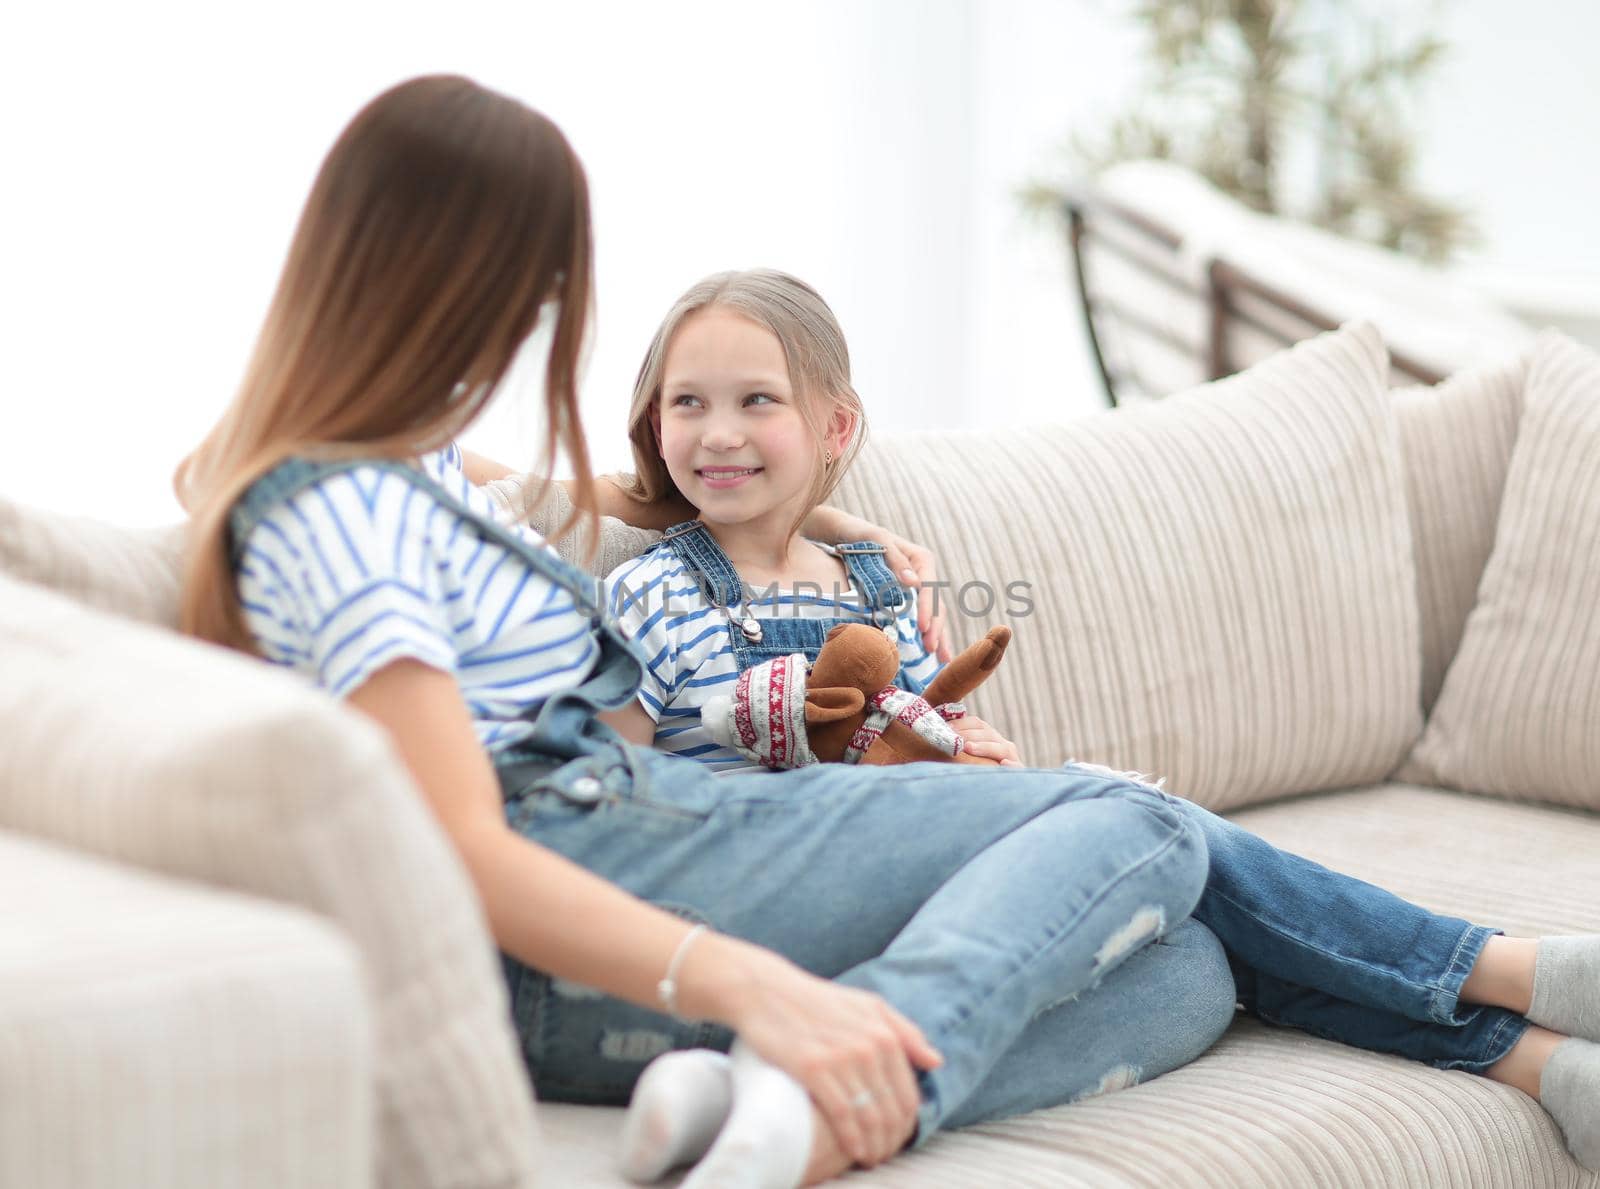 mom and little daughter sitting on the couch in a cozy living room.photo with copy space